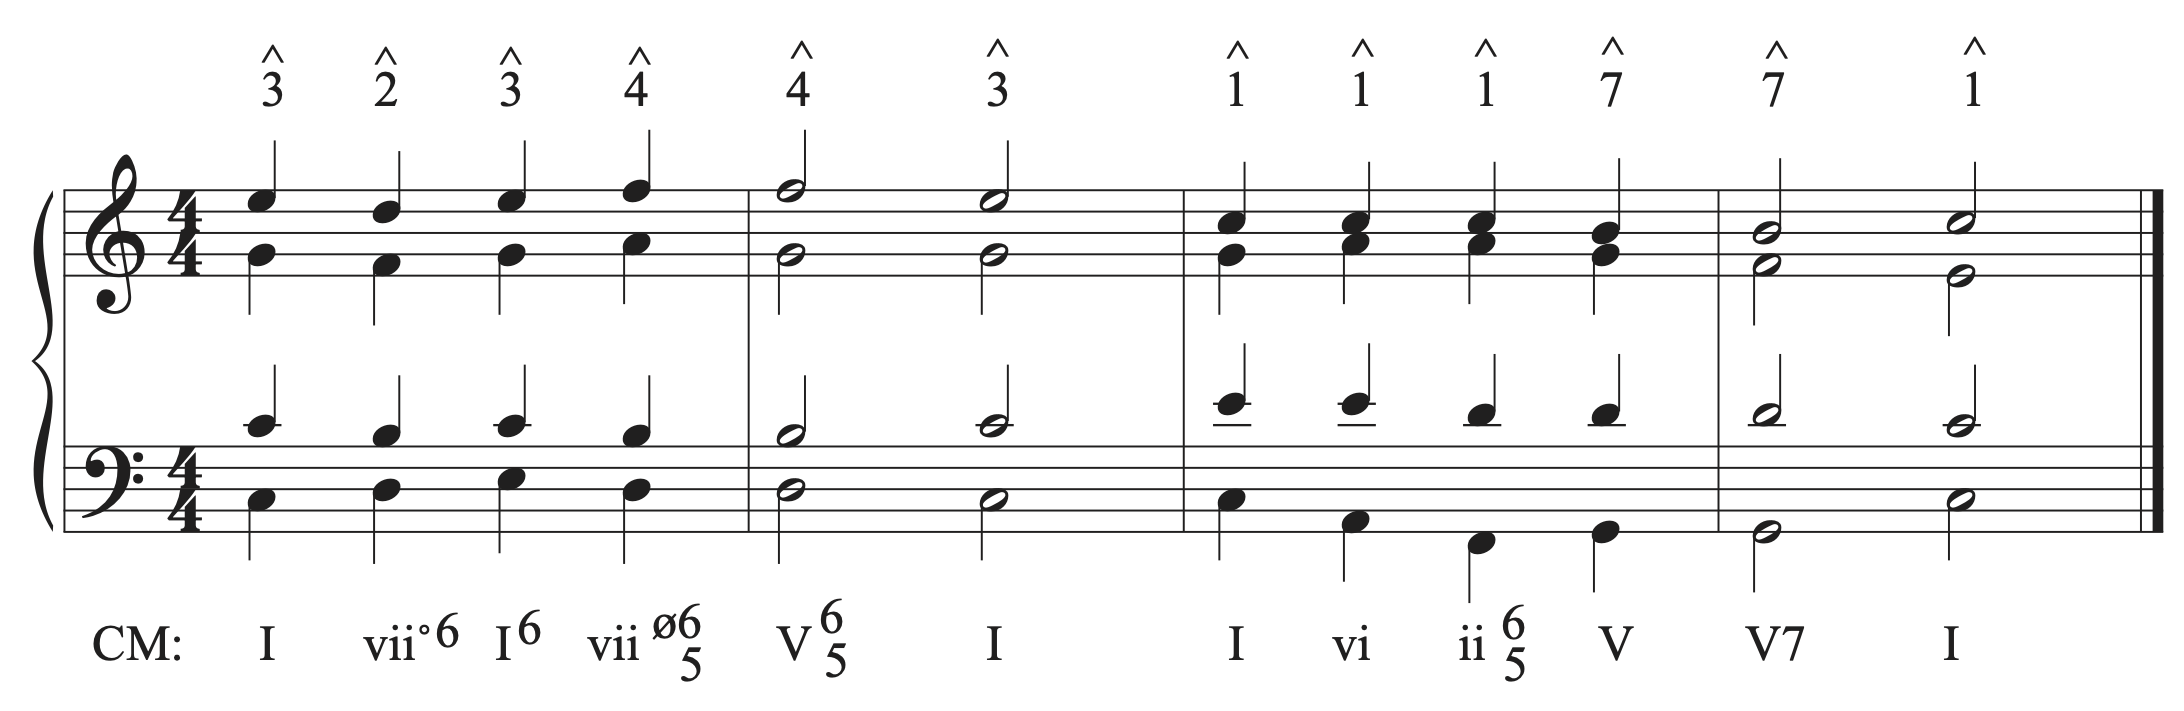 A four-bar musical example with C major with soprano, alto, tenor, band bass voices written to part write the given harmonic progression.